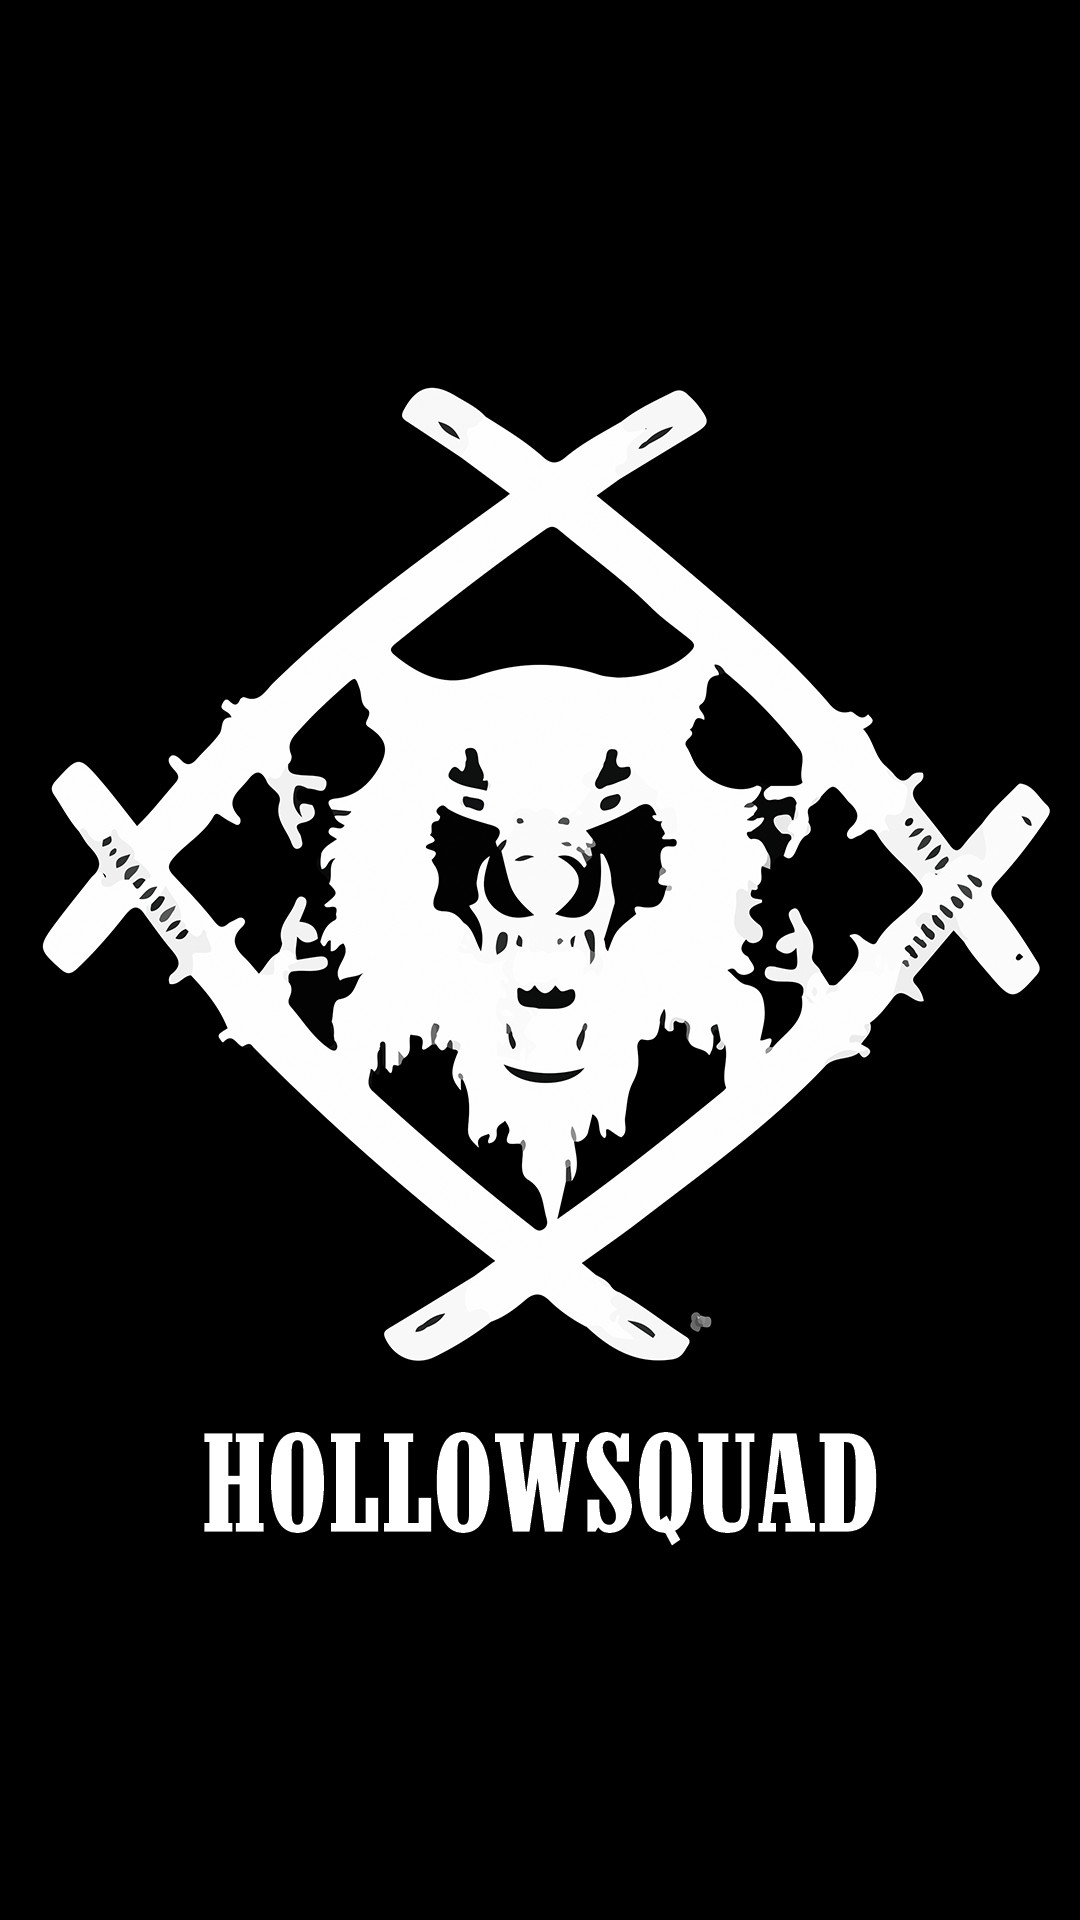 1080x1920 Made some HQ Sesh and Hollowsquad iPhone 6 and iPhone 6 Plus wallpapers  since I see